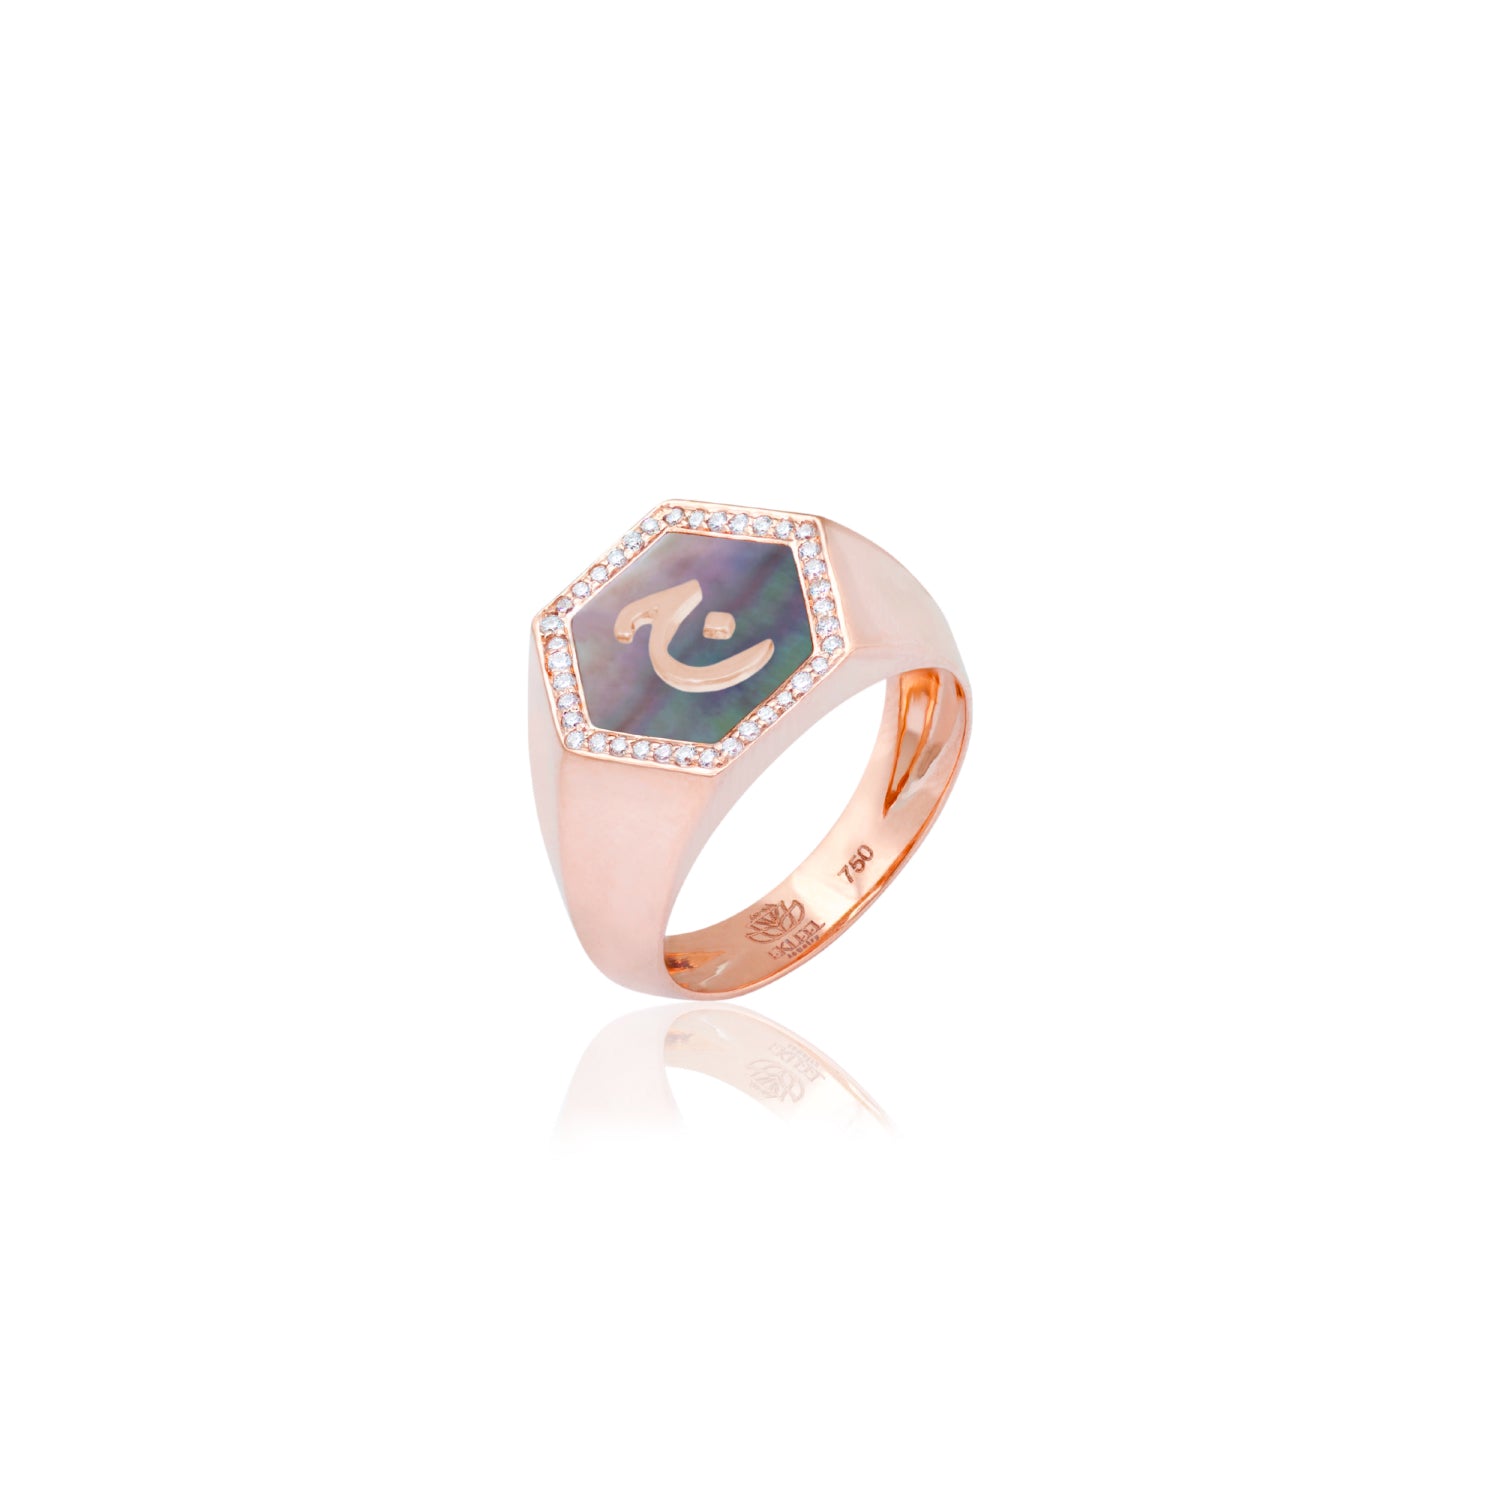 Qamoos 2.0 Letter ج Black Mother of Pearl and Diamond Signet Ring in Rose Gold